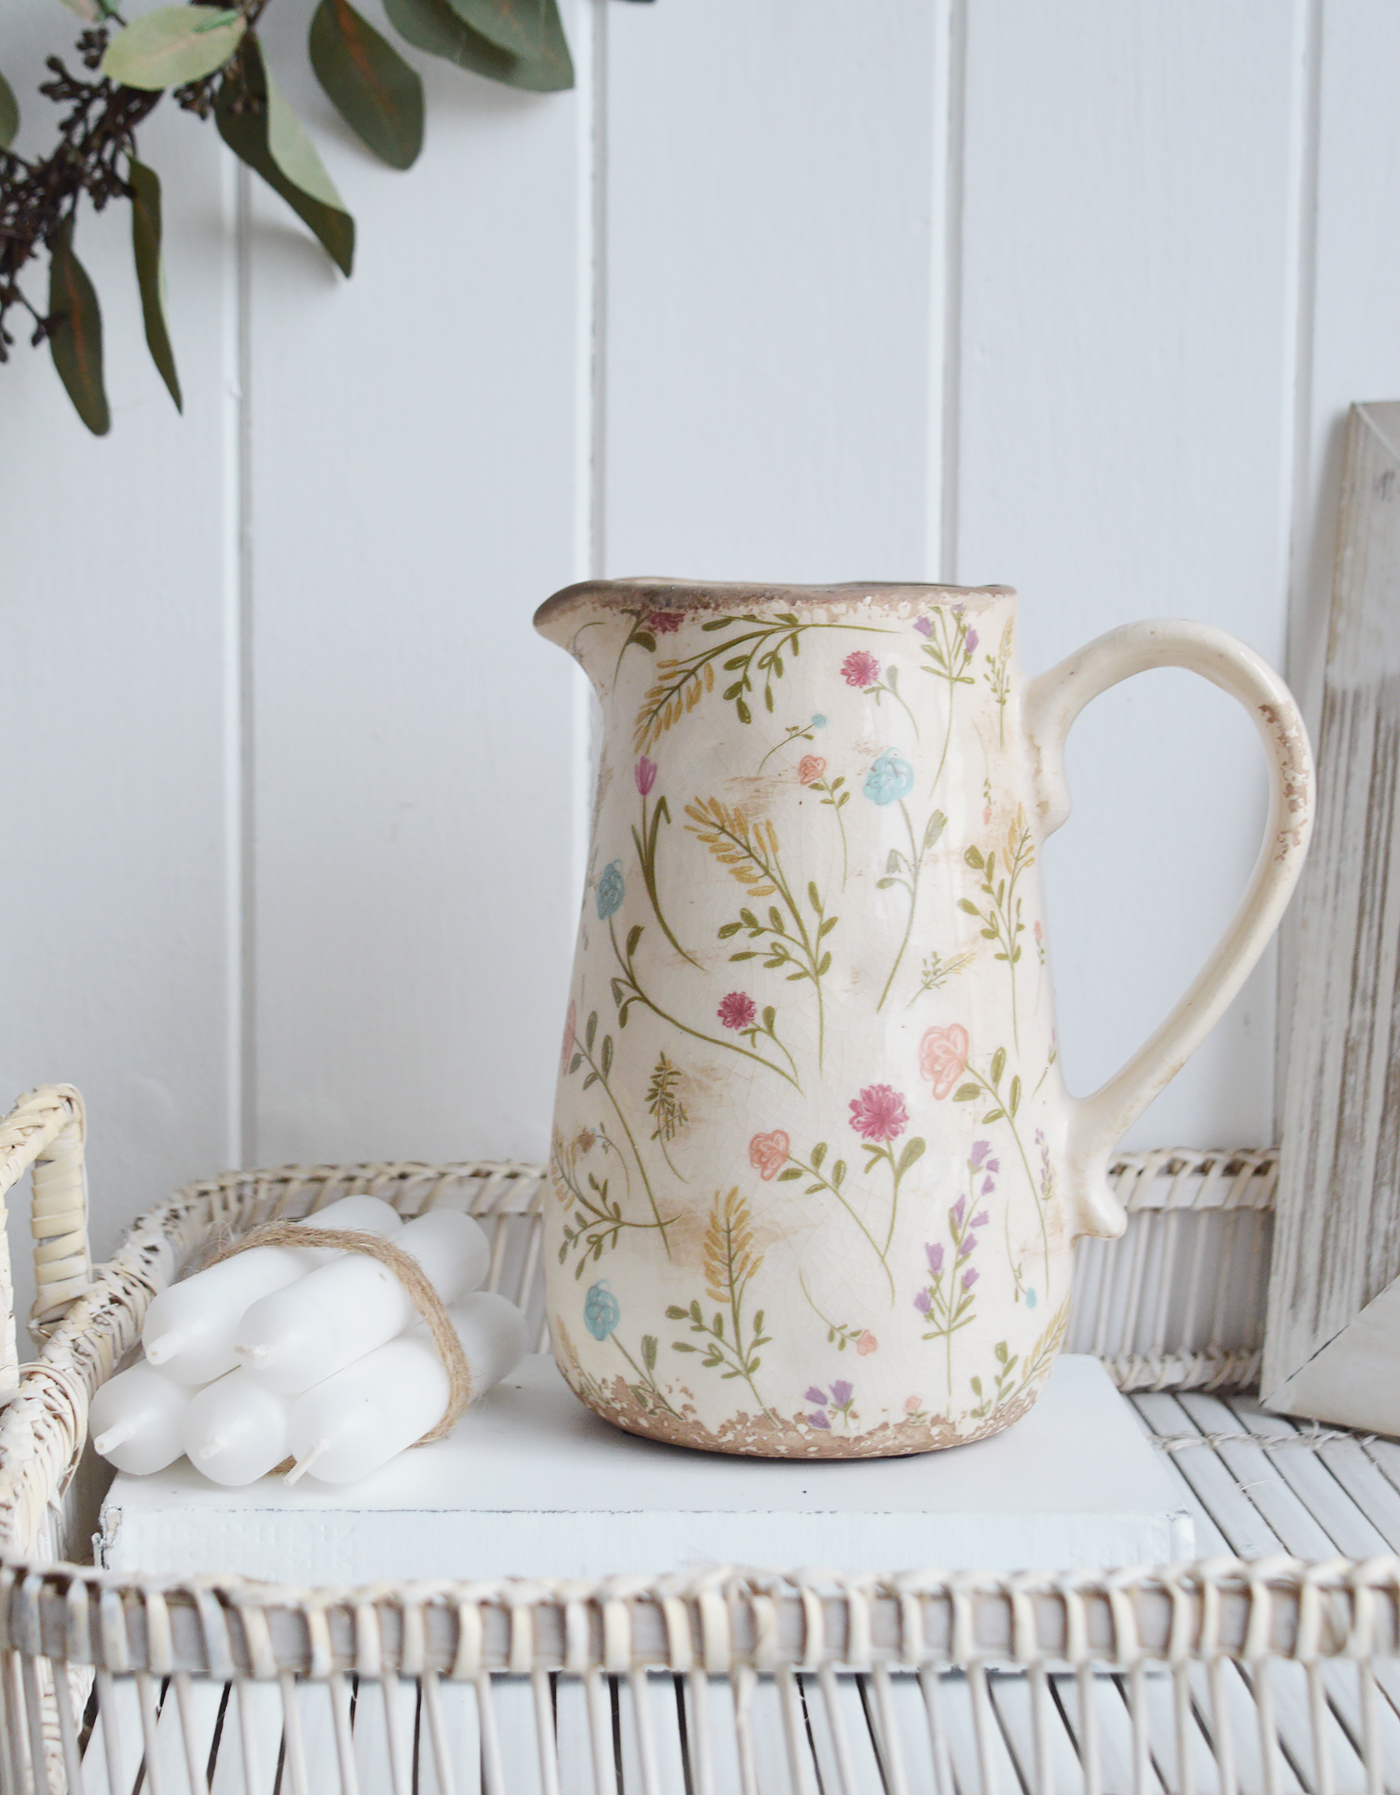 Marston Aged Vintage Style Ceramics. Pitcher jug vase - New England, coastal, modern farmhouse and country homes interiors and furniture